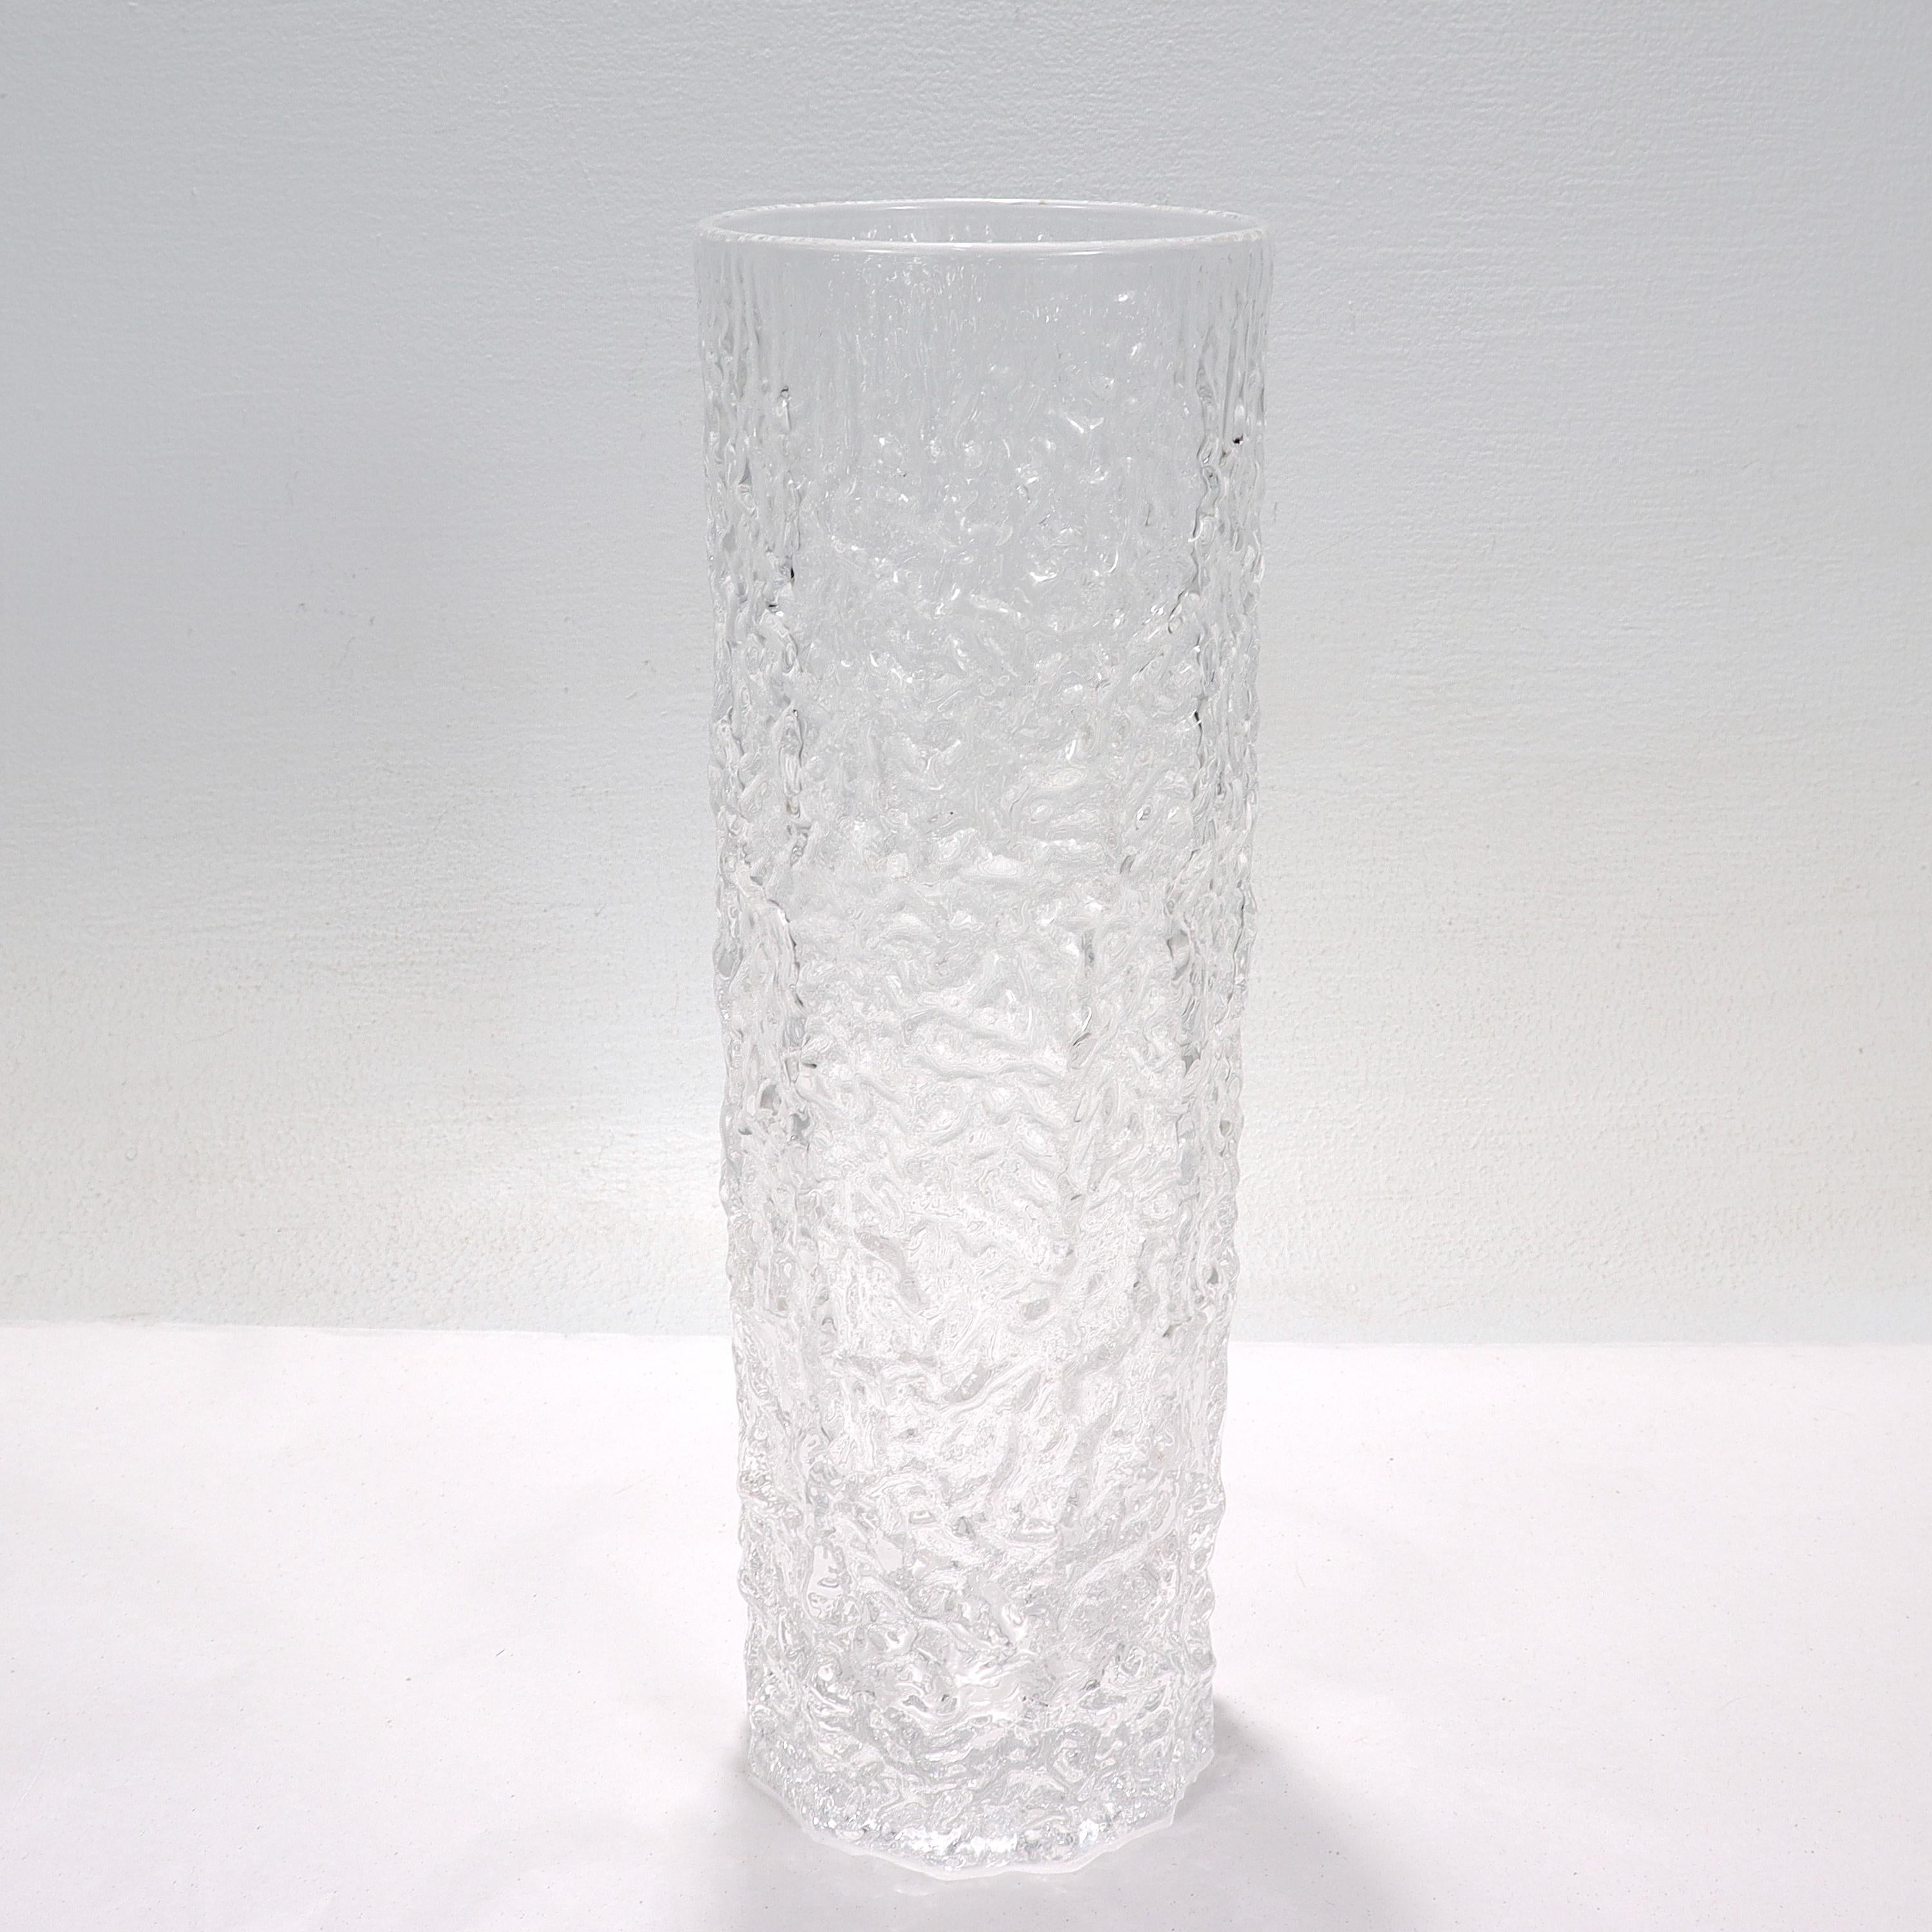 A fine antique Mid-Century Modern art glass vase.

Attributed to Geoffrey Baxter for Whitefriars. 

Baxter joined Whitefriars in 1954 and became well known for his design of textured vases, such as this one and 